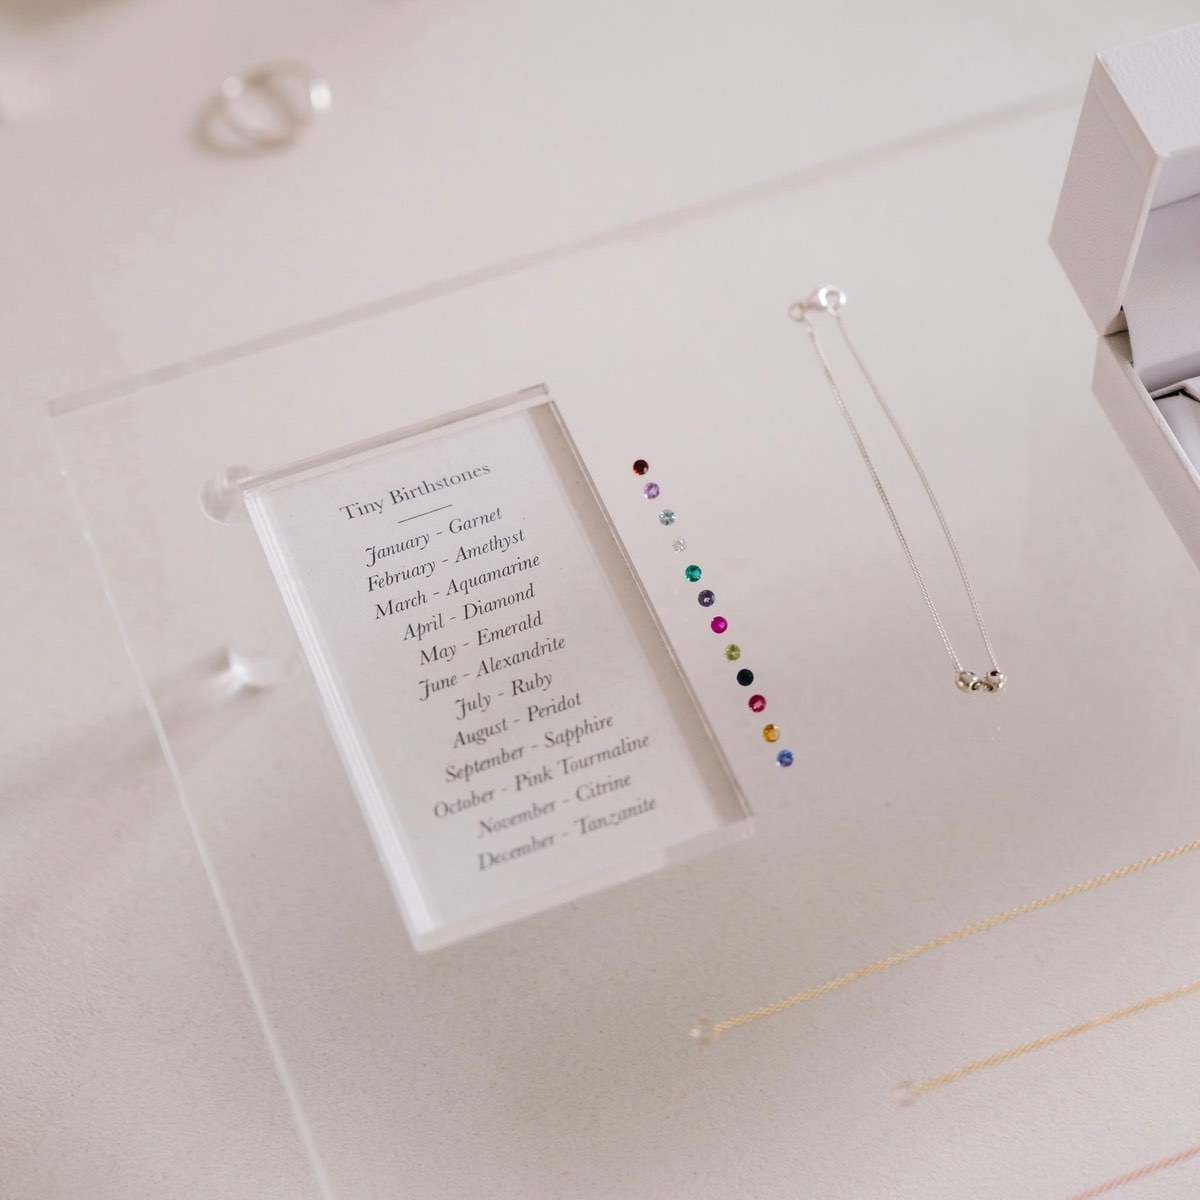 A selection of our 12 birthstones to personalise our Tiny Birthstone Charm Bracelet